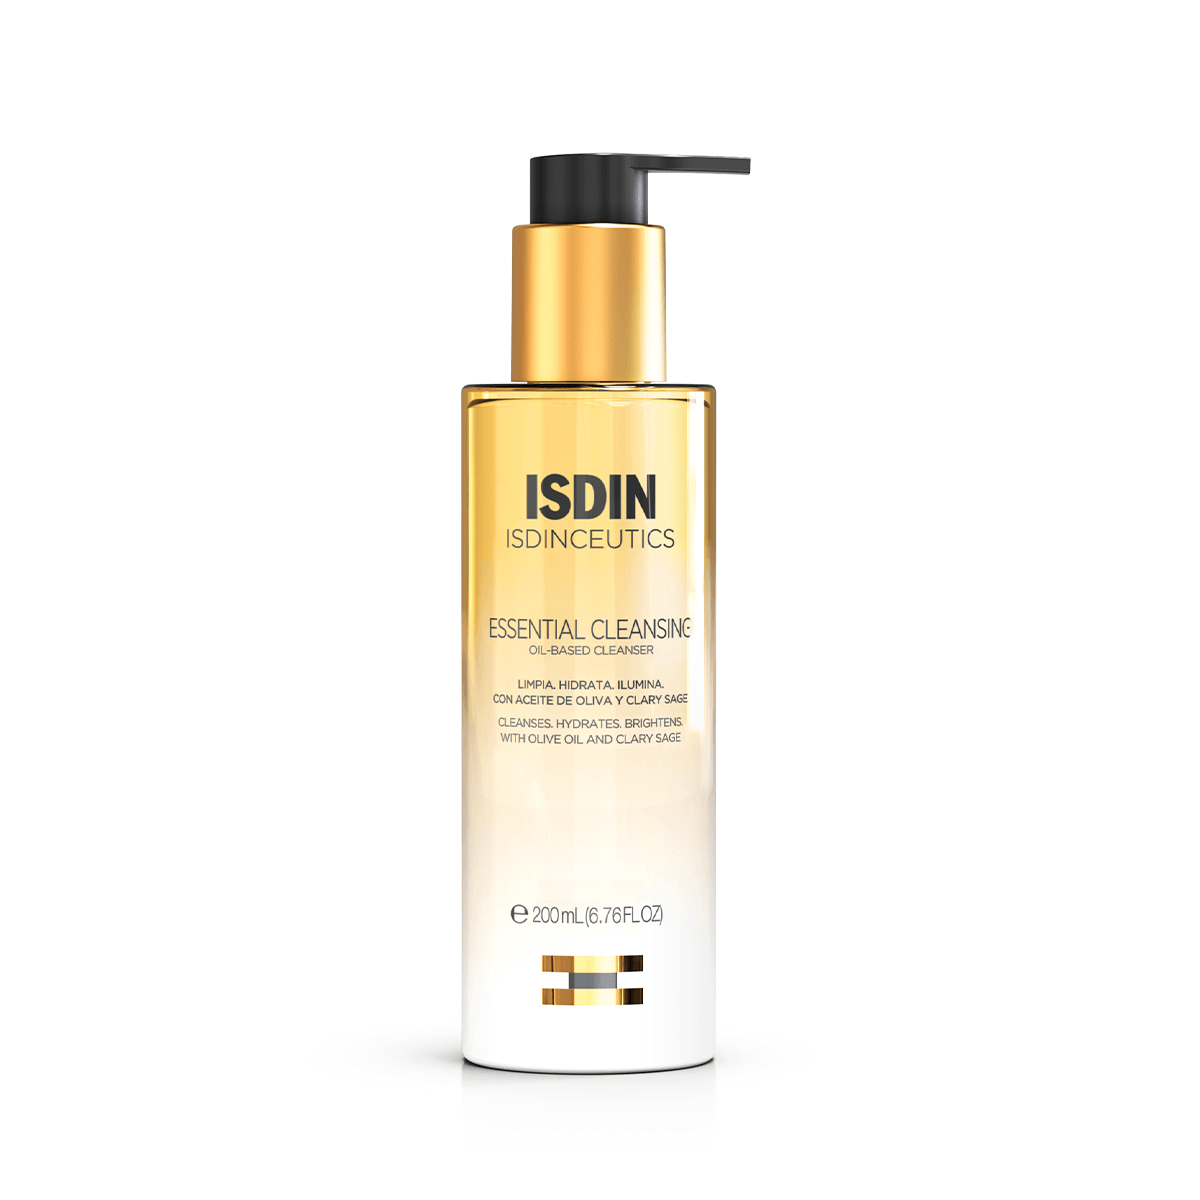 Essential Cleansing Isdin